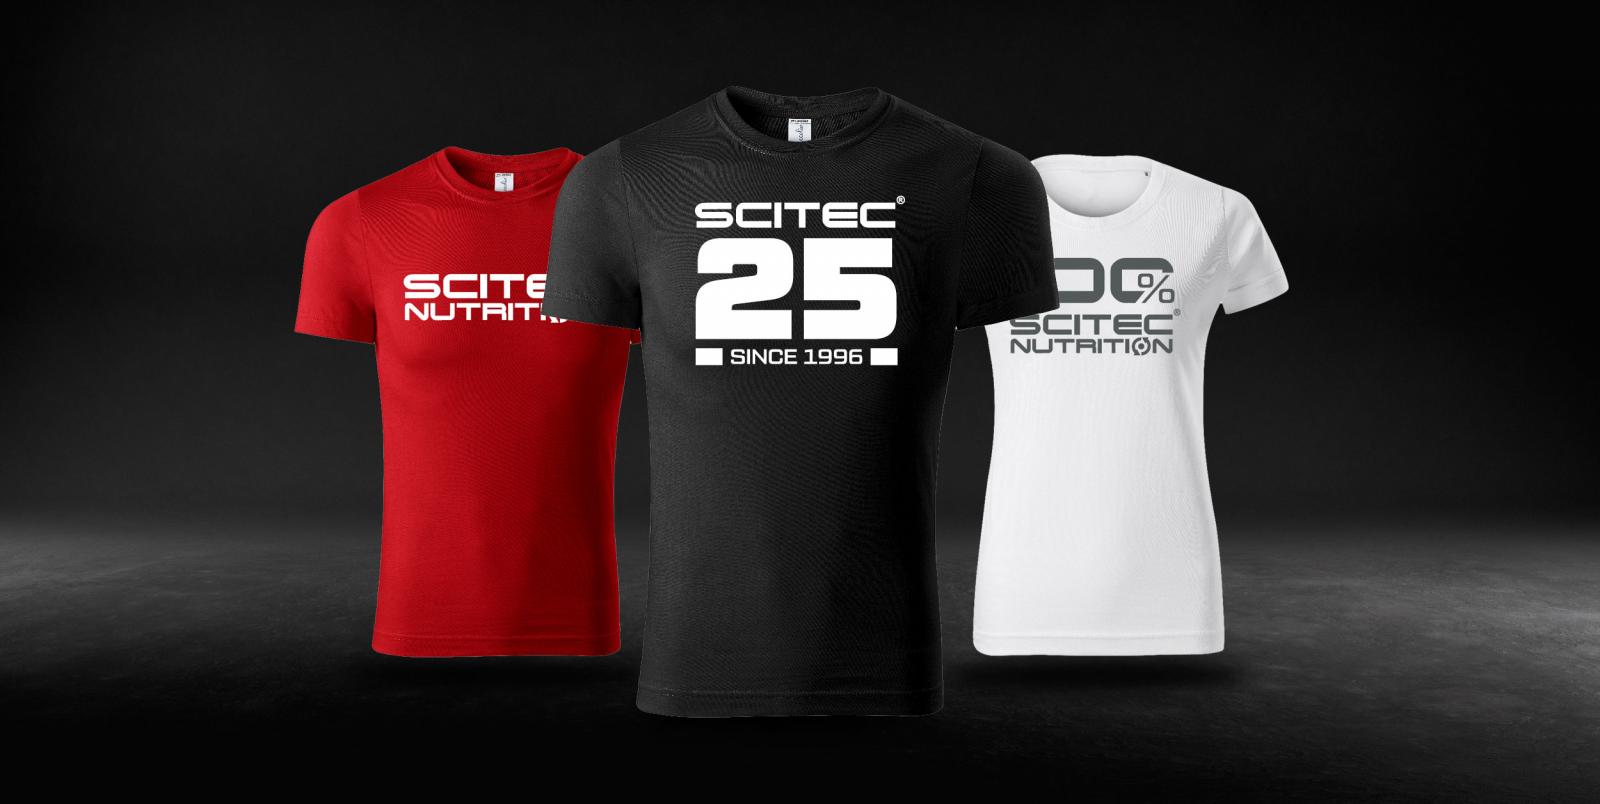 Scitec Nutrition T-Shirt see selection Fitness Sports Training 